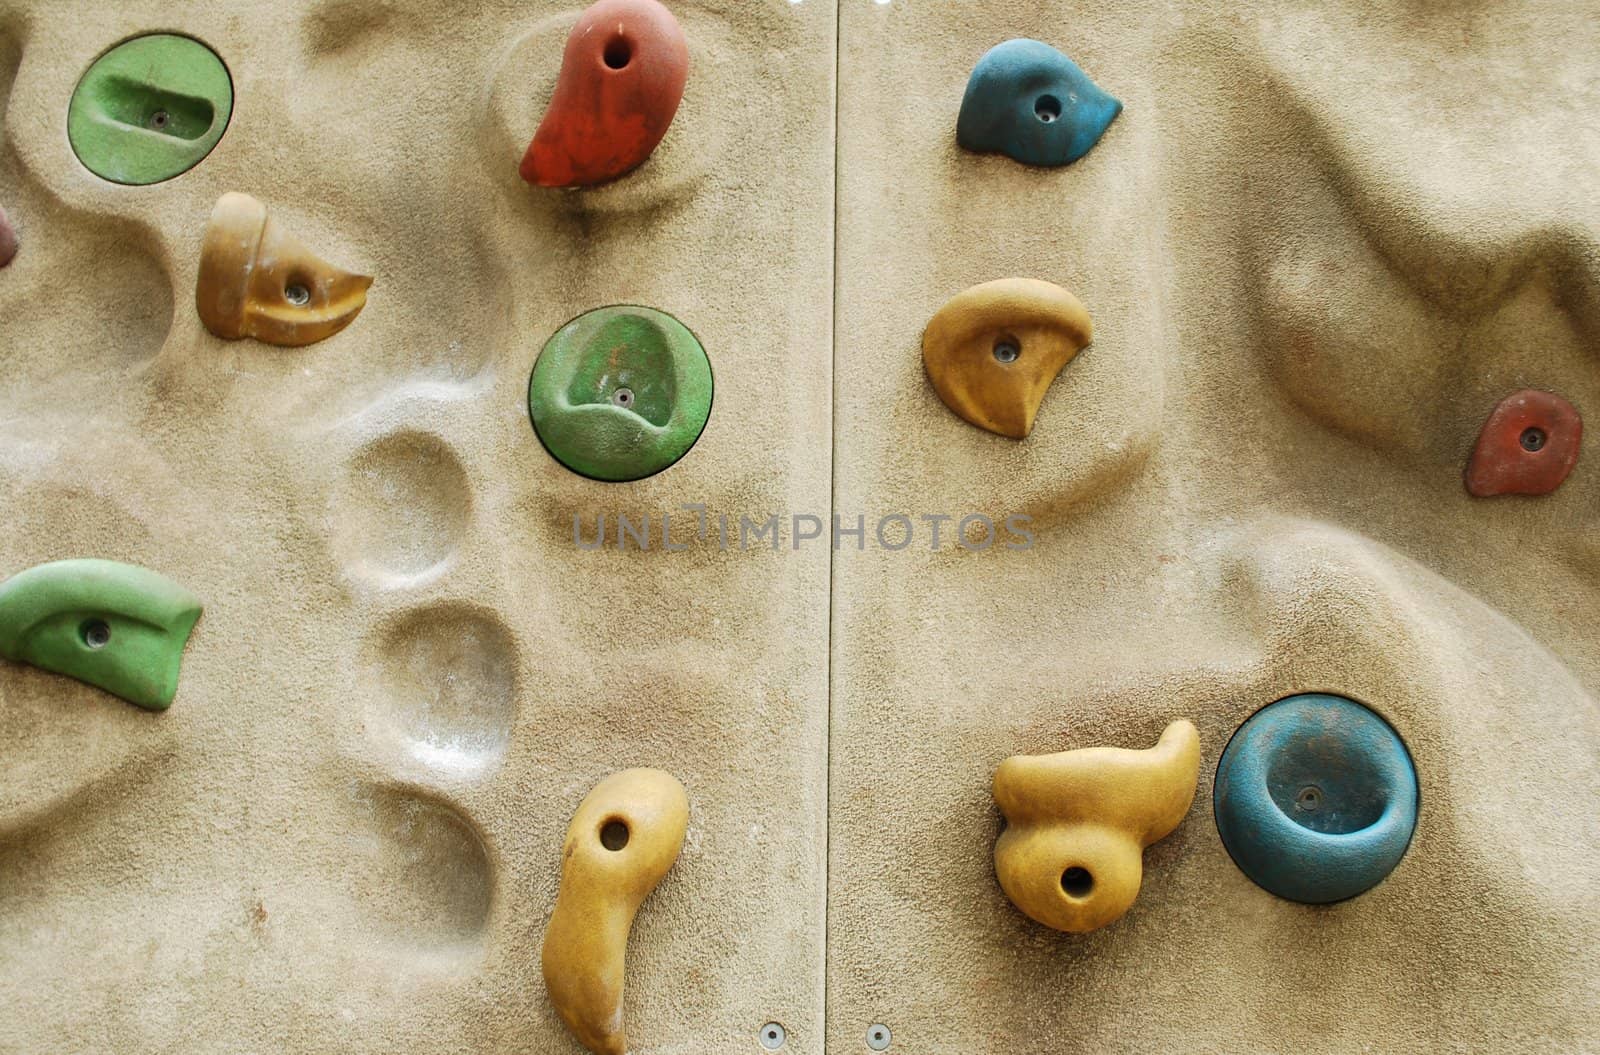 Climbing wall (background) by luissantos84